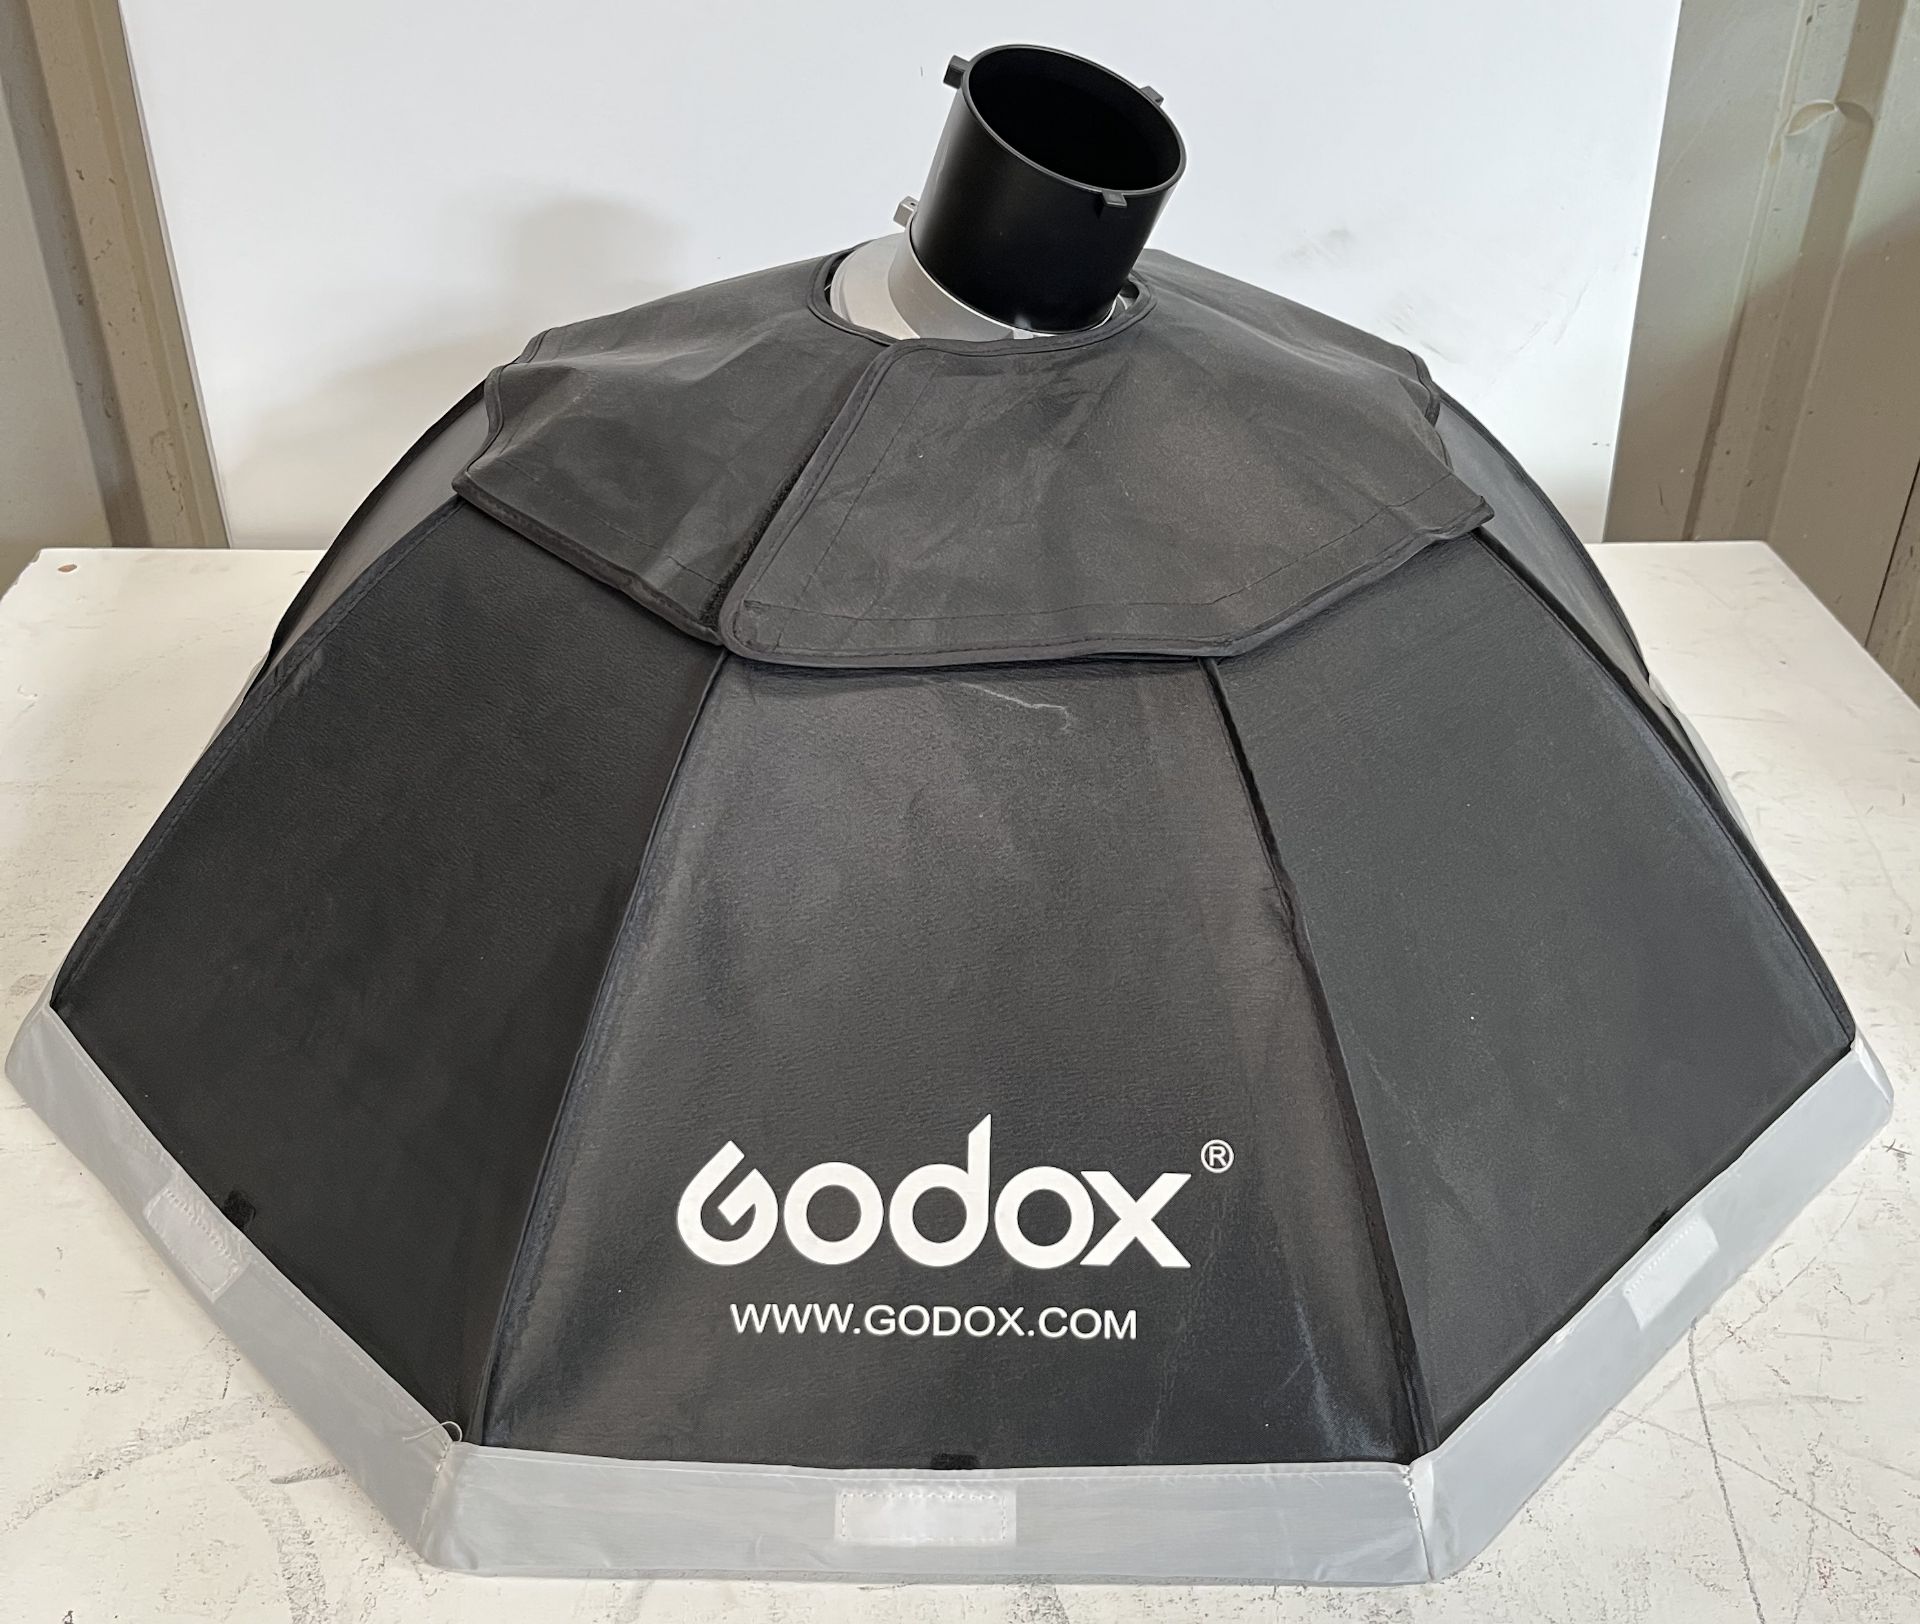 Godox SK400 Studio Light with Reflective Umbrella on Adjustable Stands (Location Brentwood. Please - Image 3 of 3